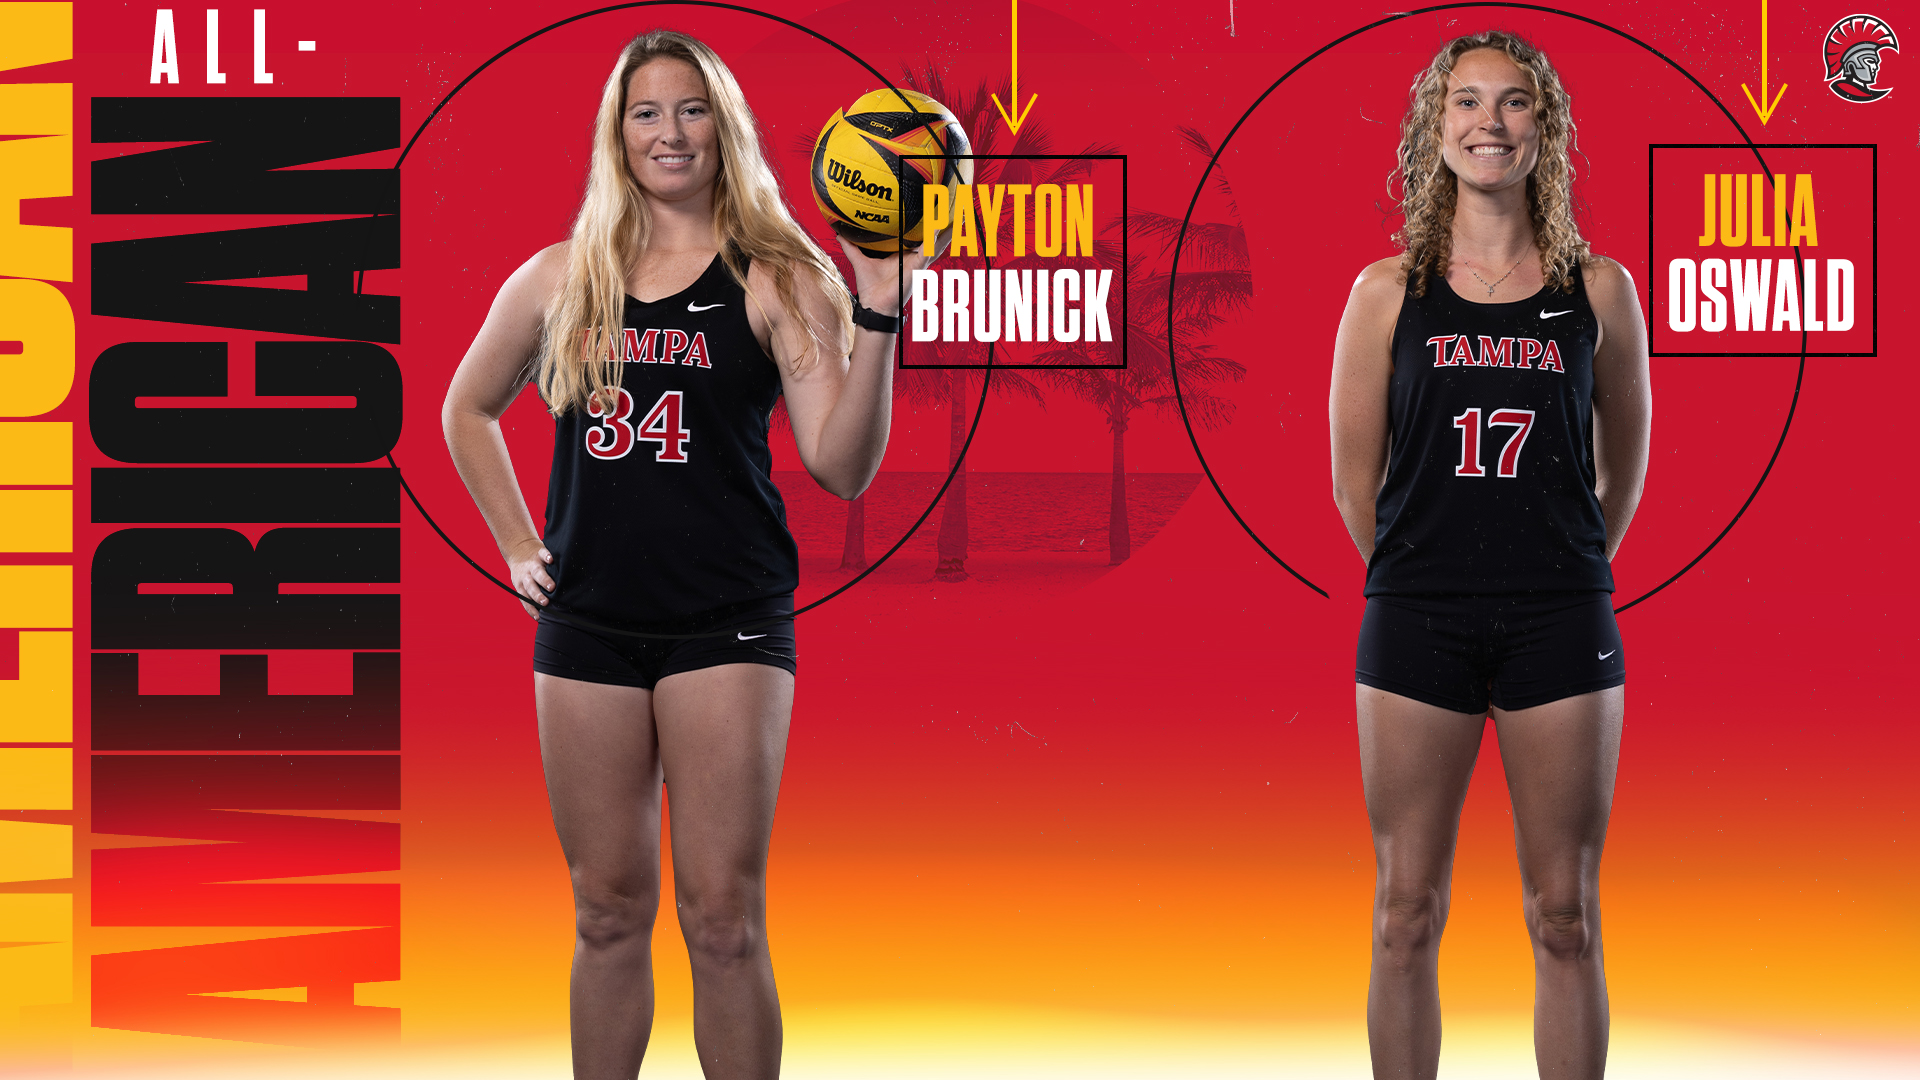 Payton Brunick and Julia Oswald Named All-Americans